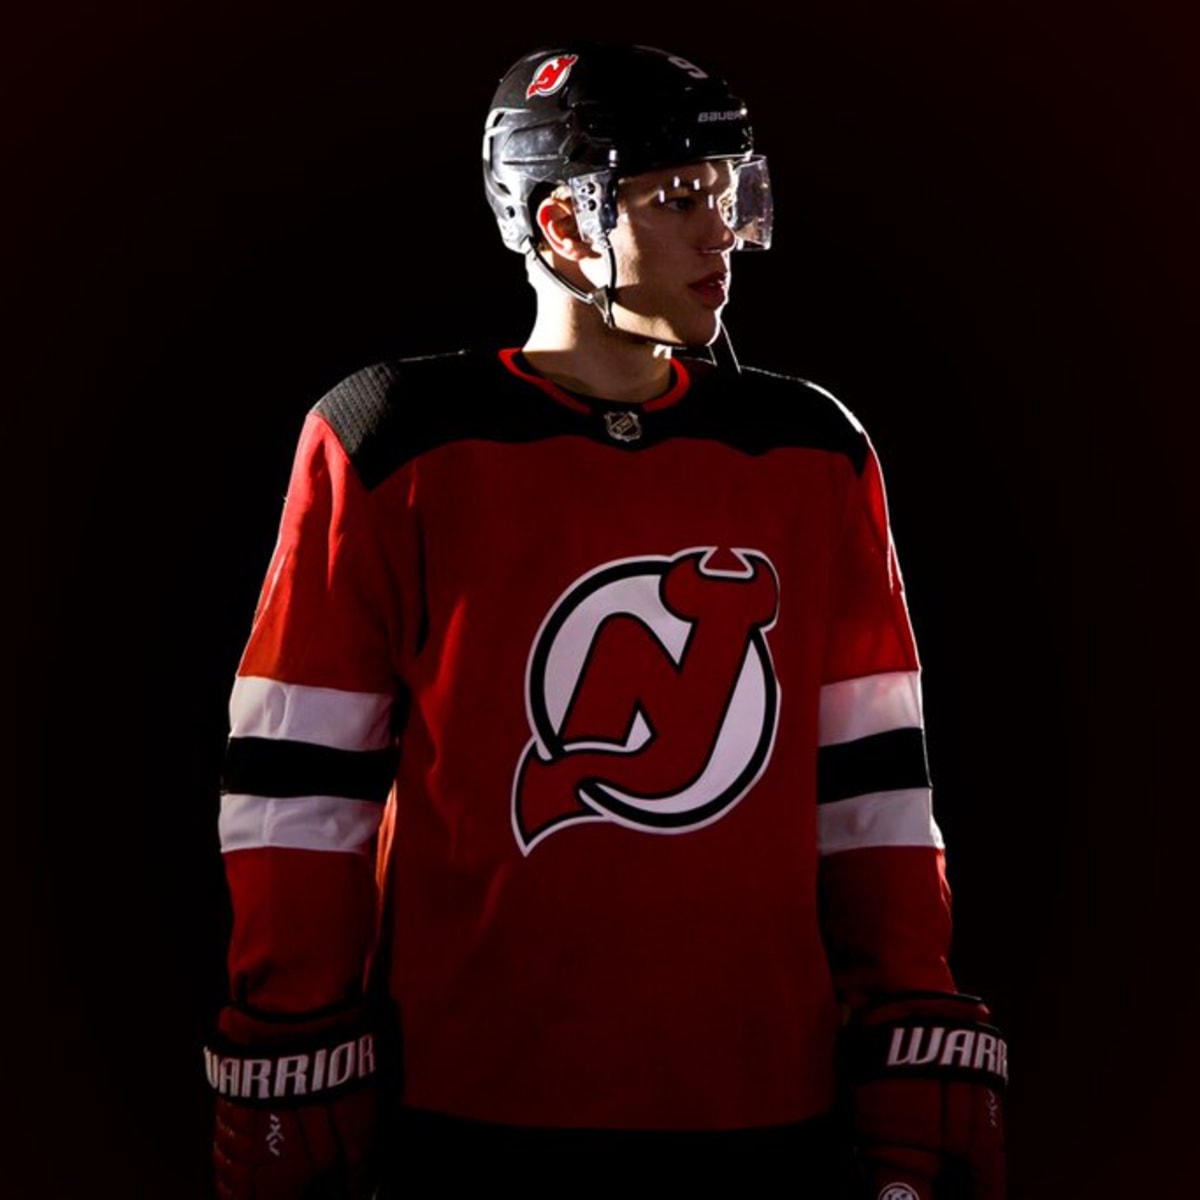 This New Jersey Devils JERSEY IS CRAZY! 